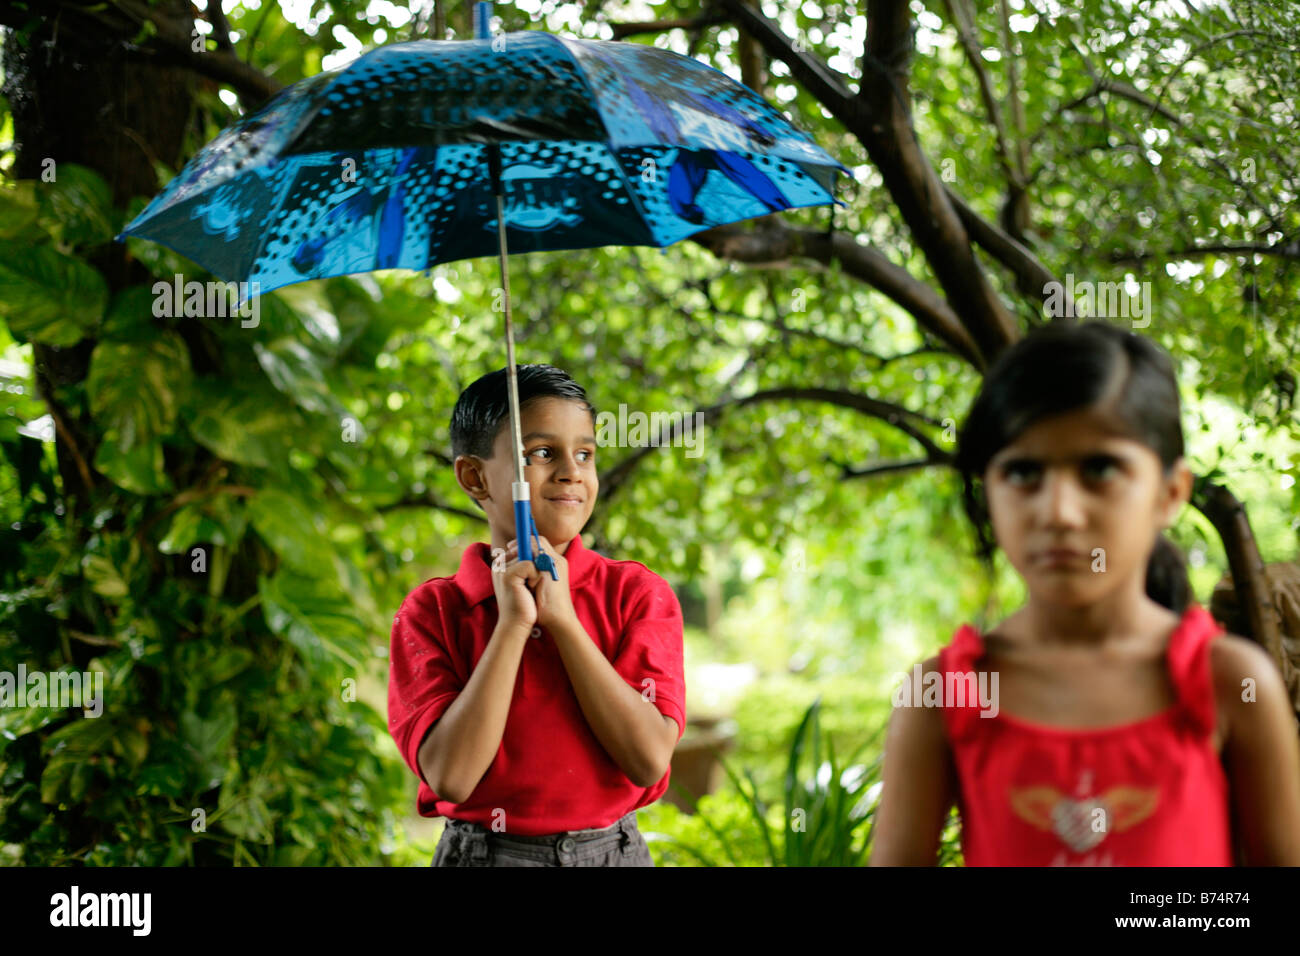 Mischievous young boy happily holding an umbrella while an unhappy girl looks on the foreground focus is on the boy Stock Photo